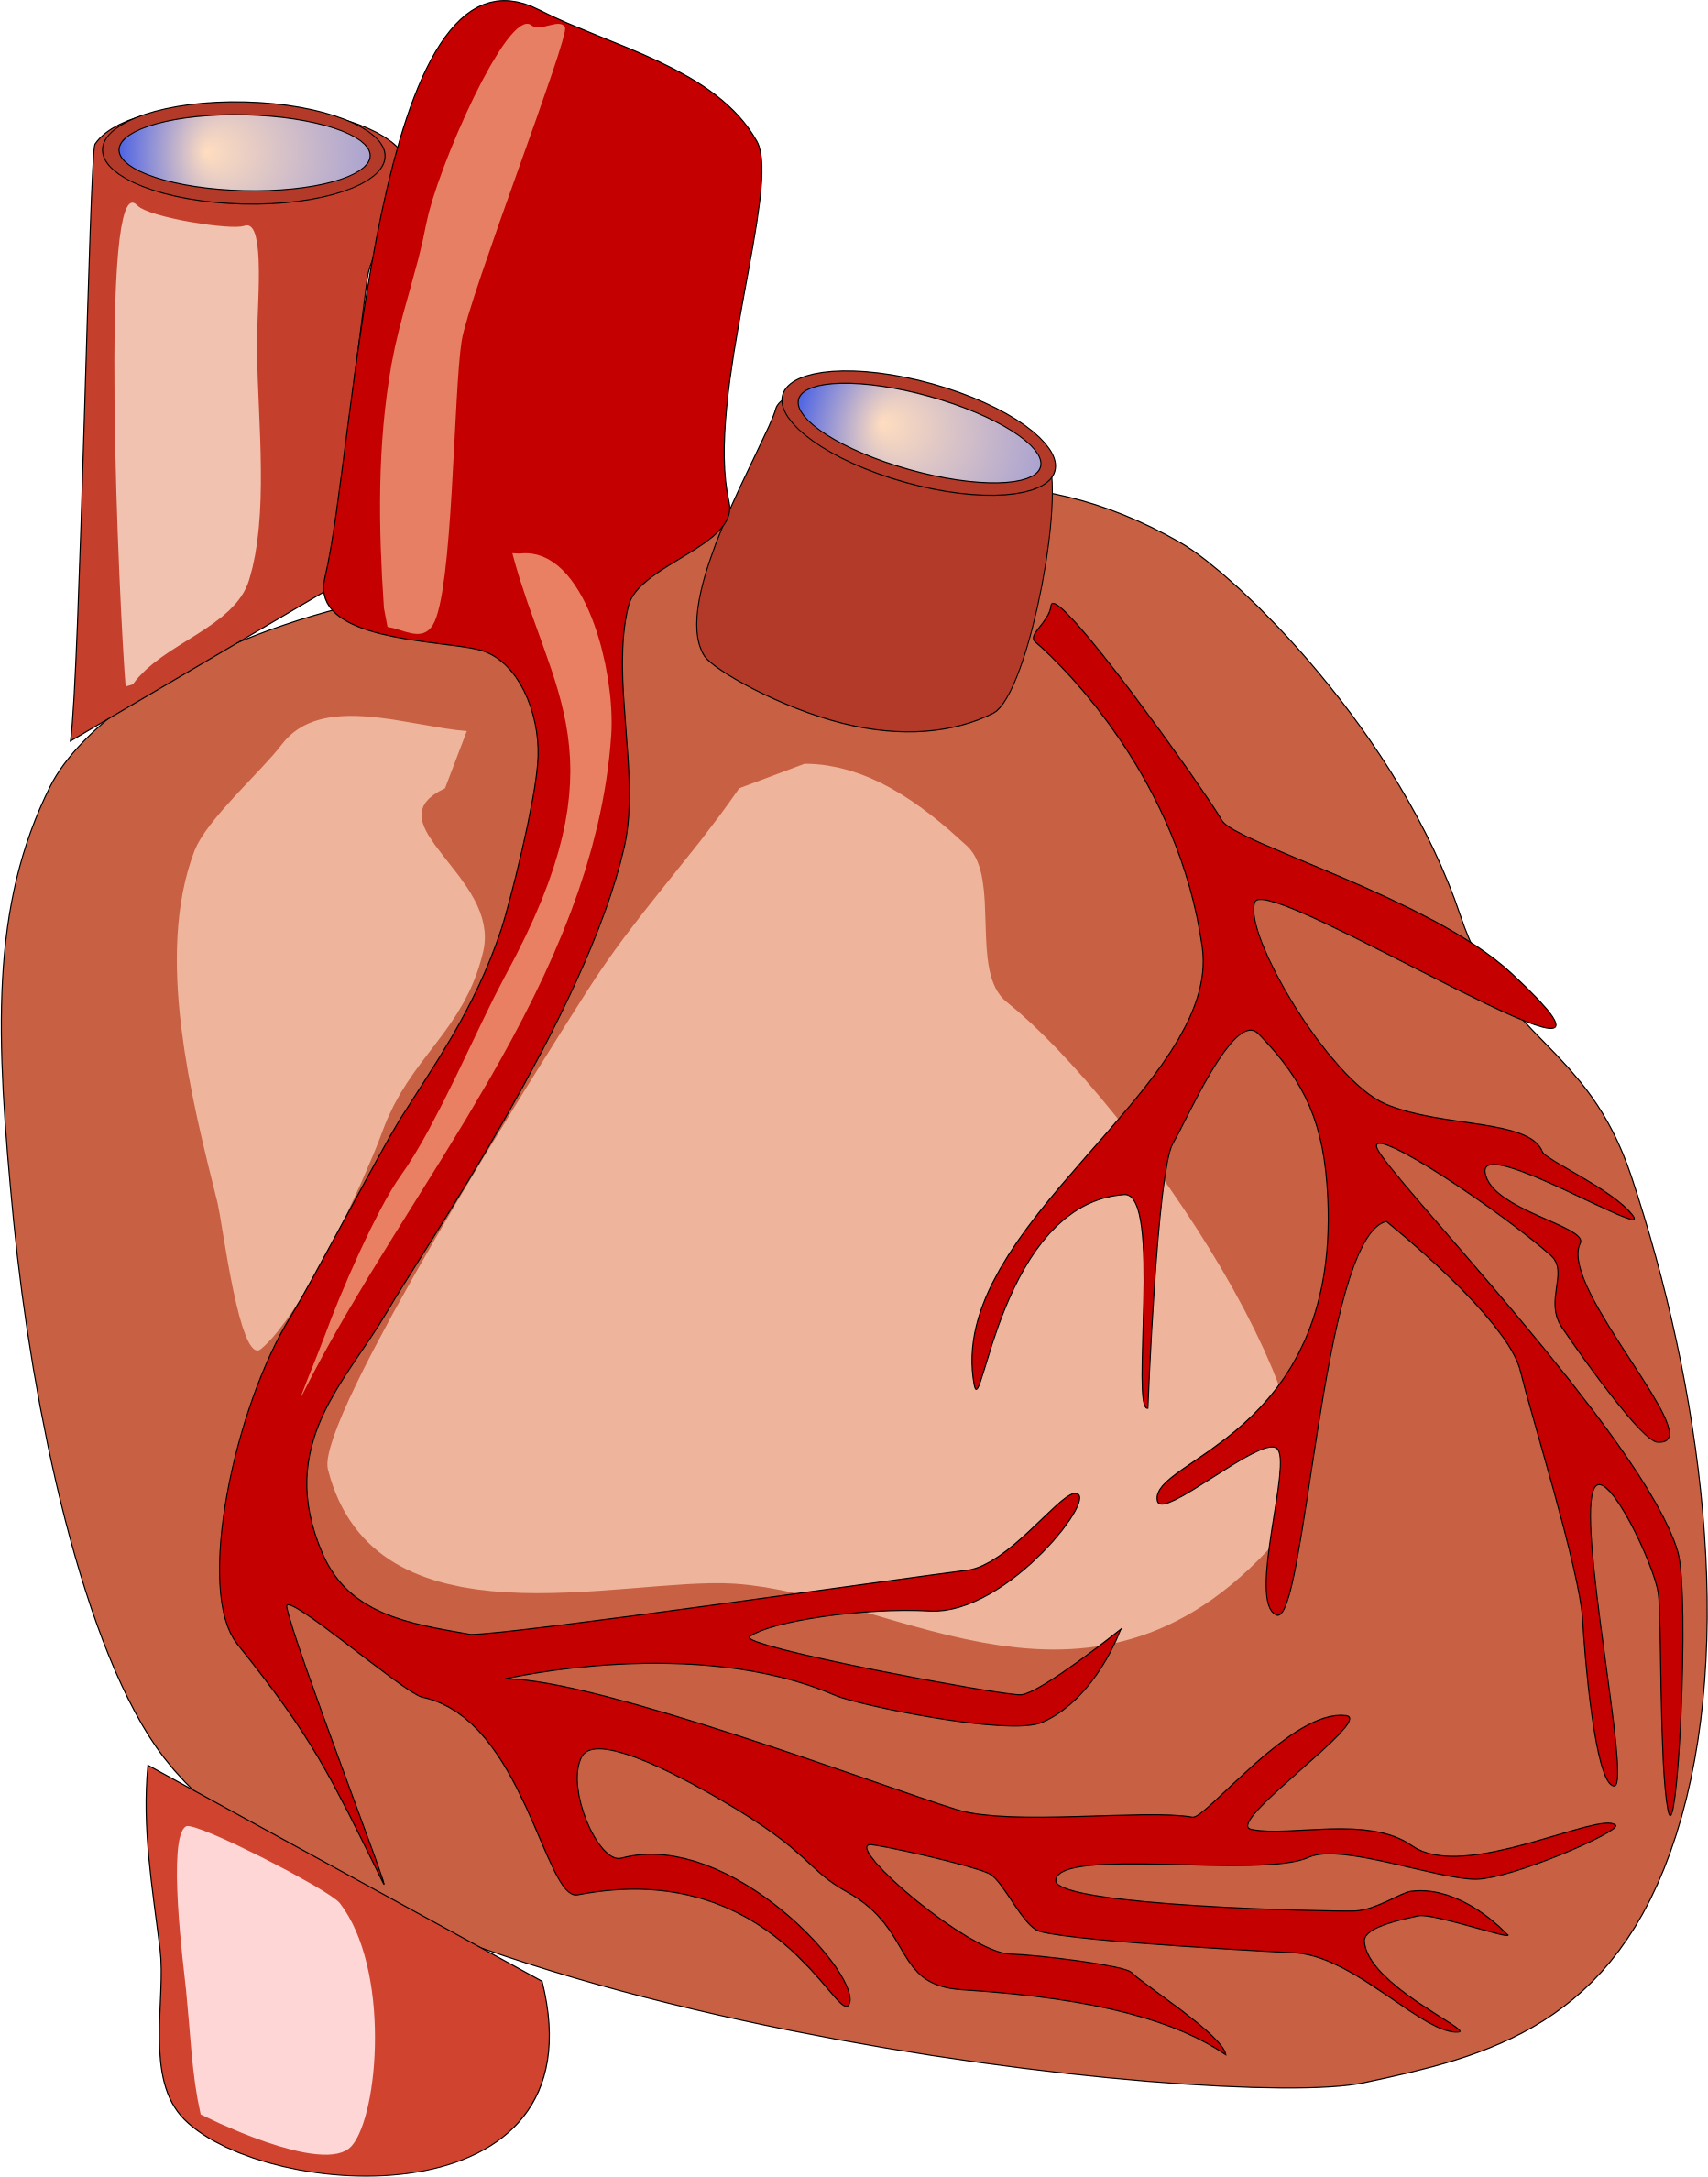 Human Heart PNG Image Background